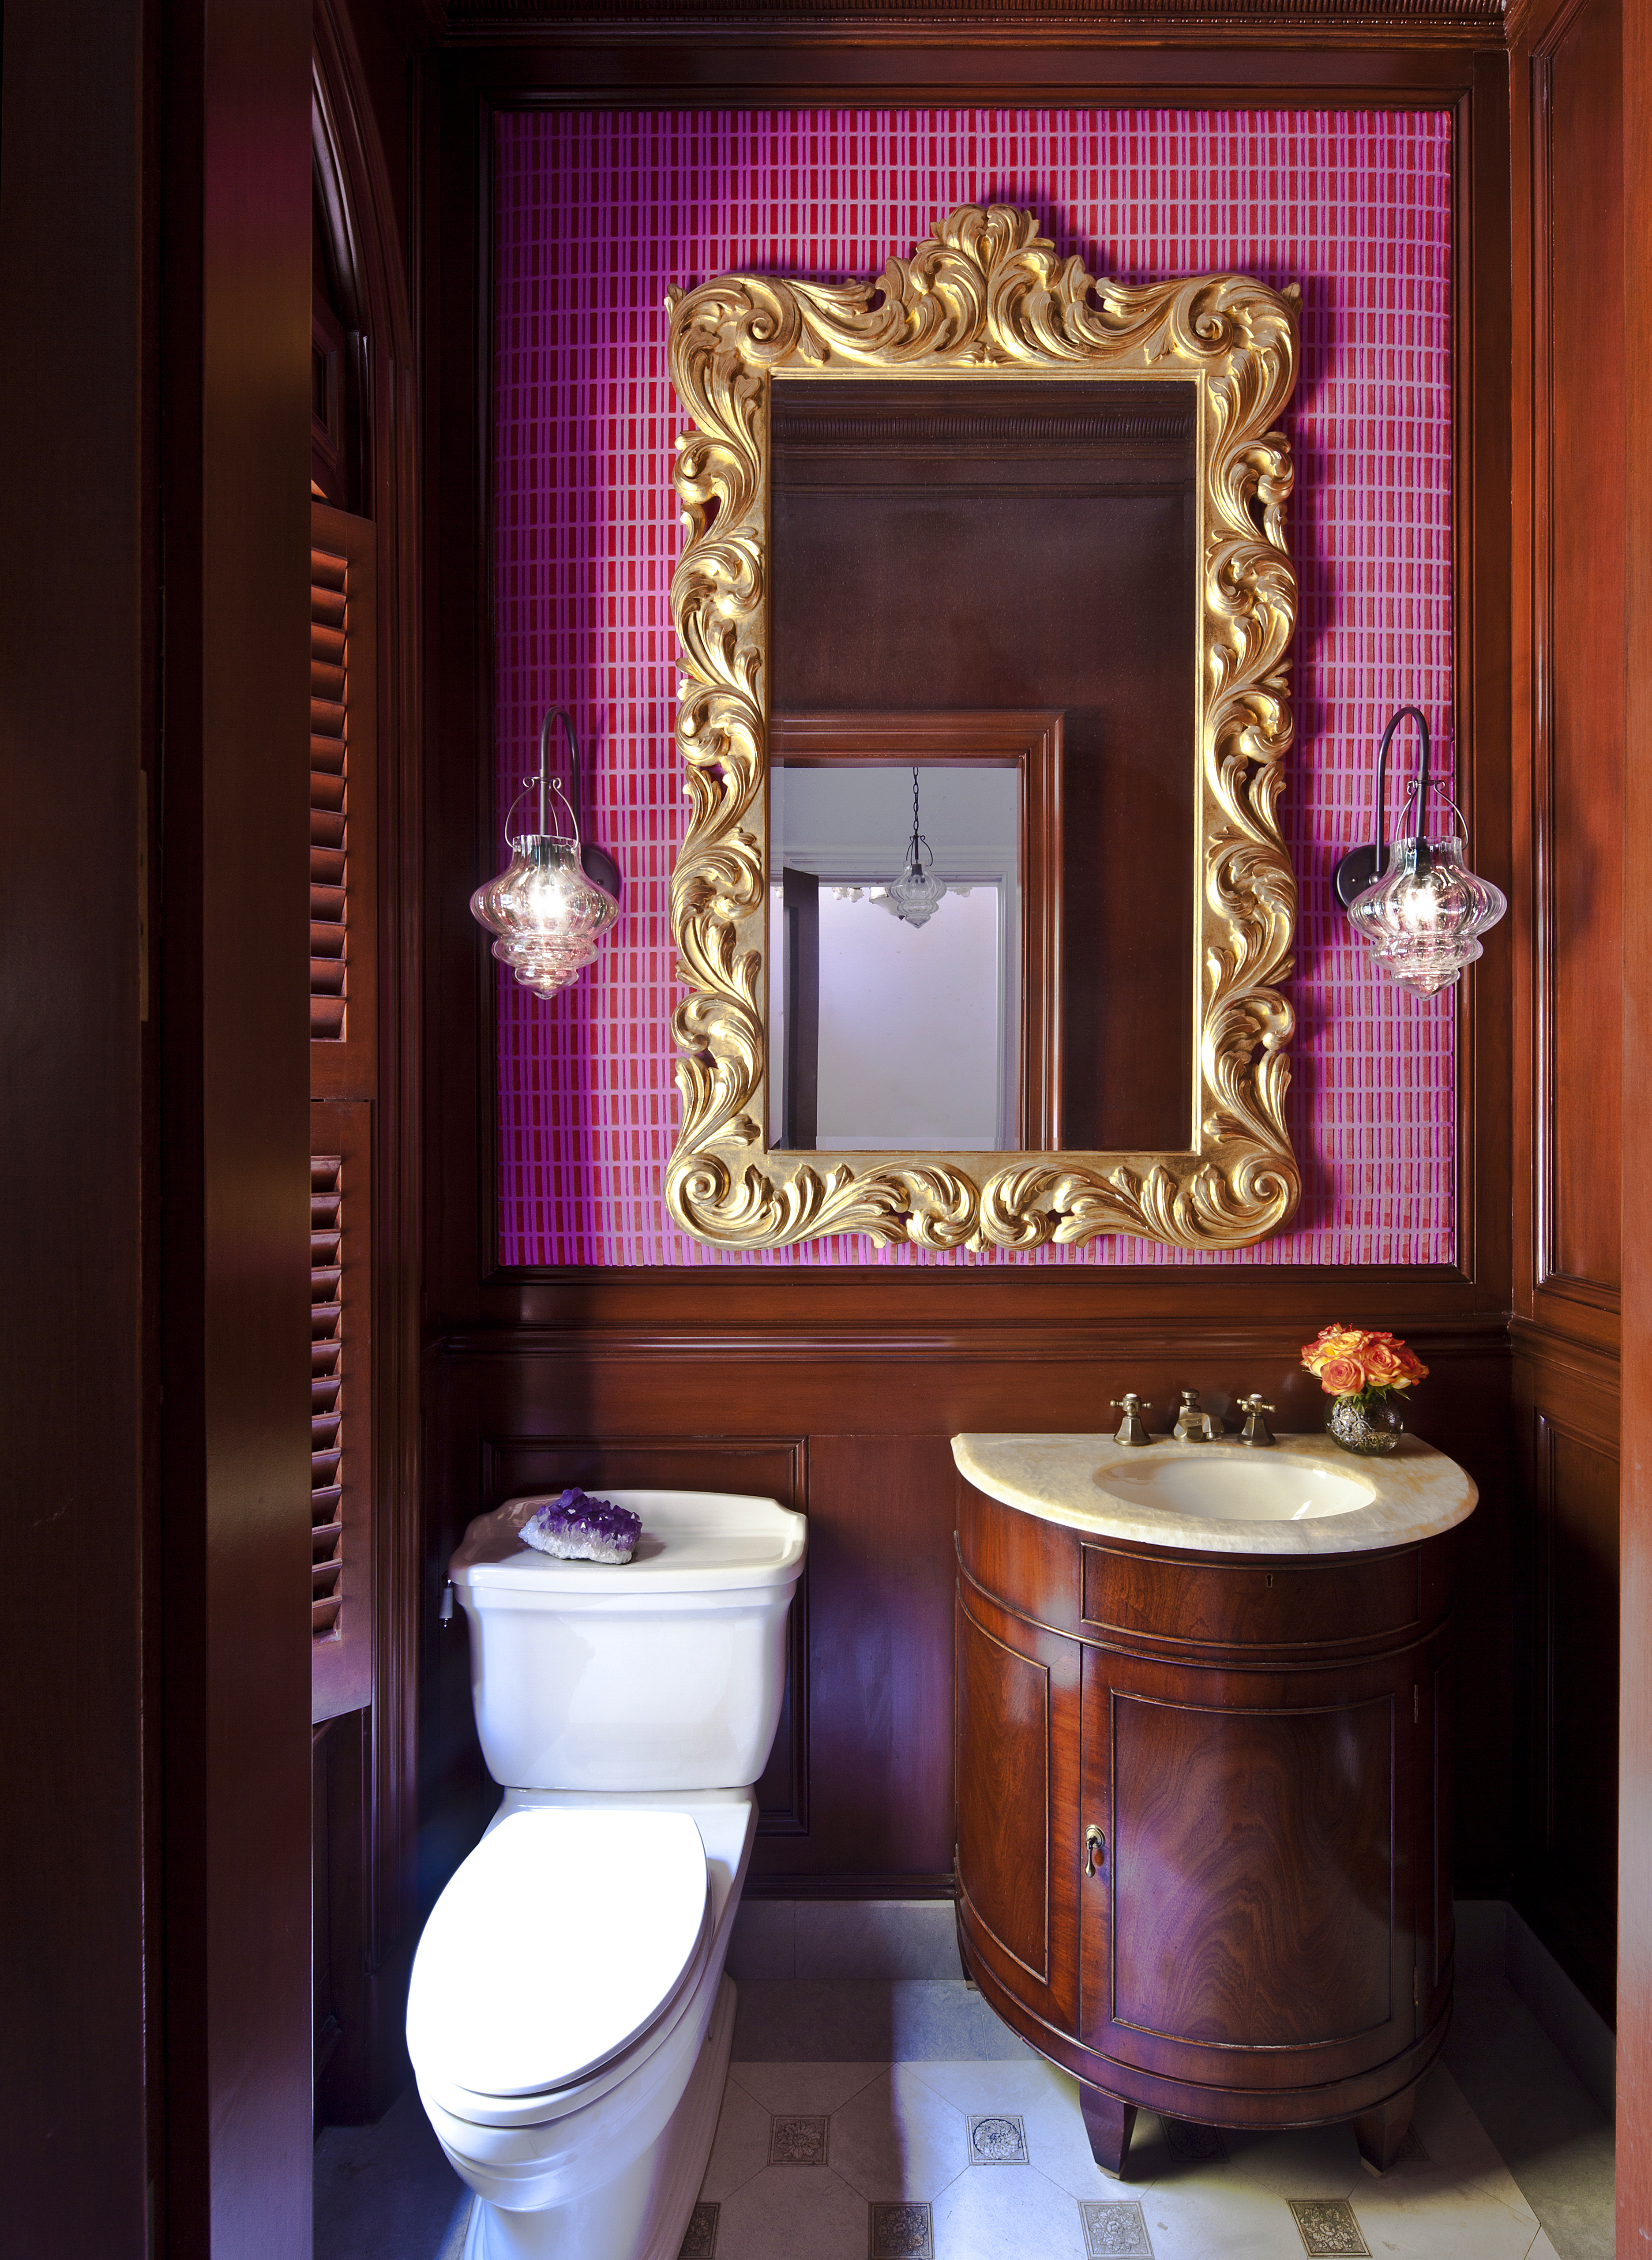 Powder room with traditional wood panelling and gilt mirror, and pink velvet wallpaper, designed by Guillaume Gentet.